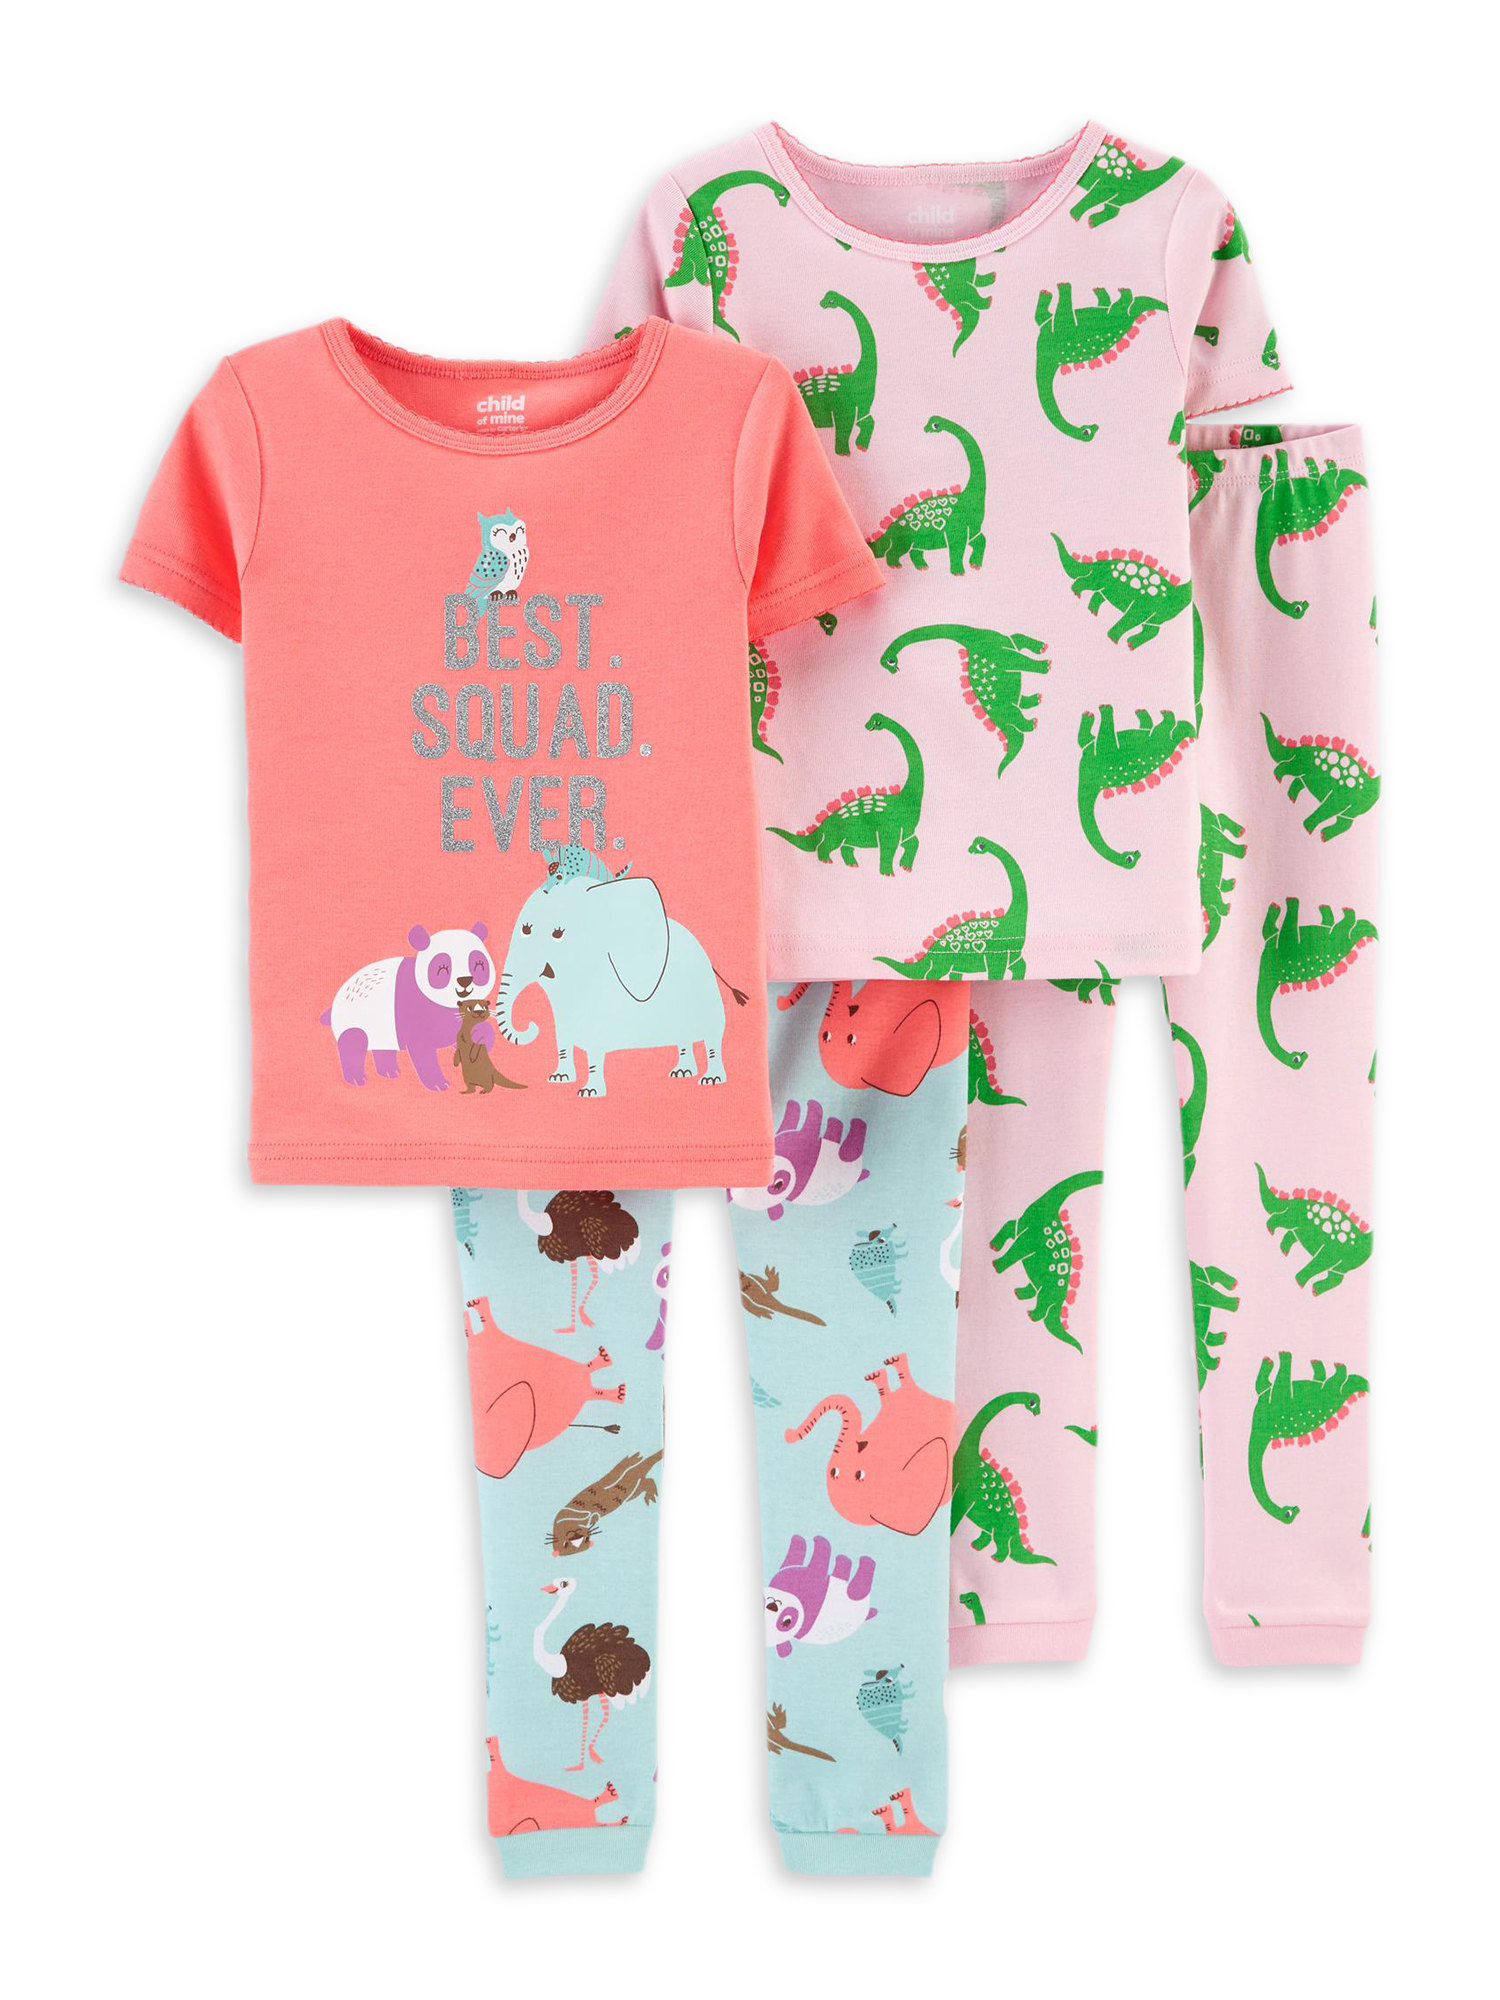 Carter's Child of Mine Baby & Toddler Girl Snug Fit Cotton Short Sleeve Pajamas, 4pc Set (12M-5T) - image 1 of 3